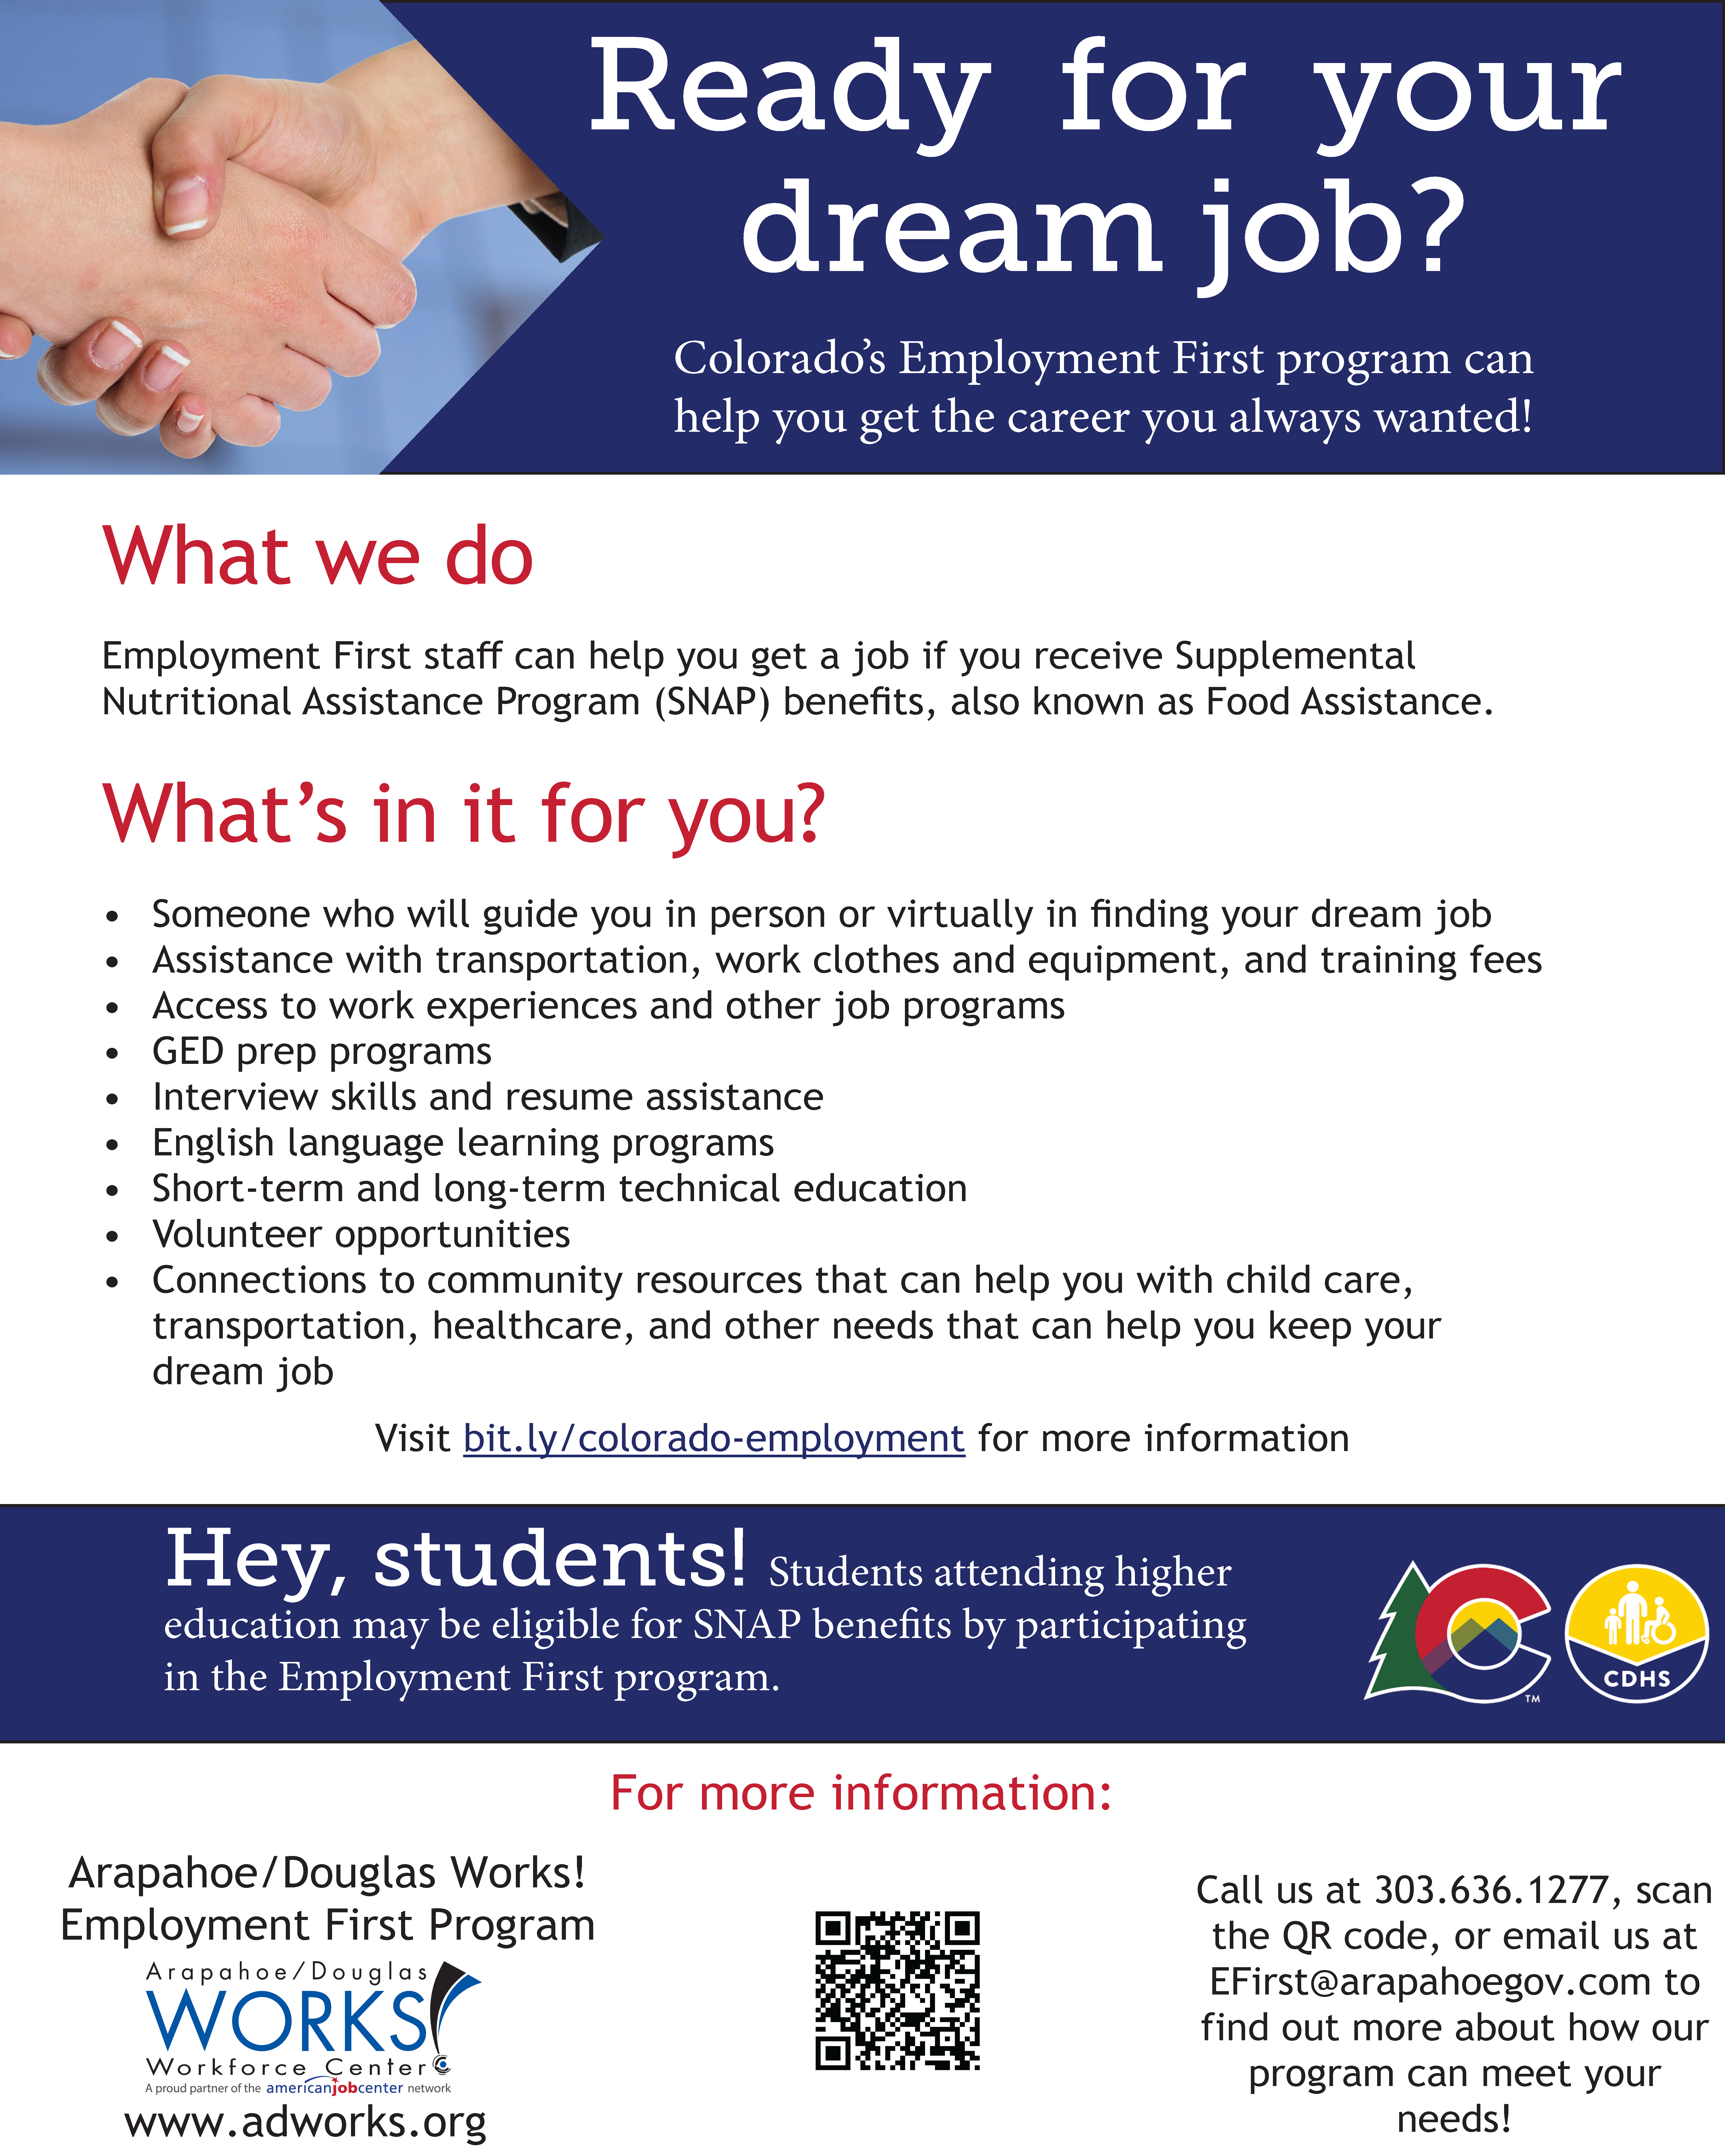 Ready for your dream job?